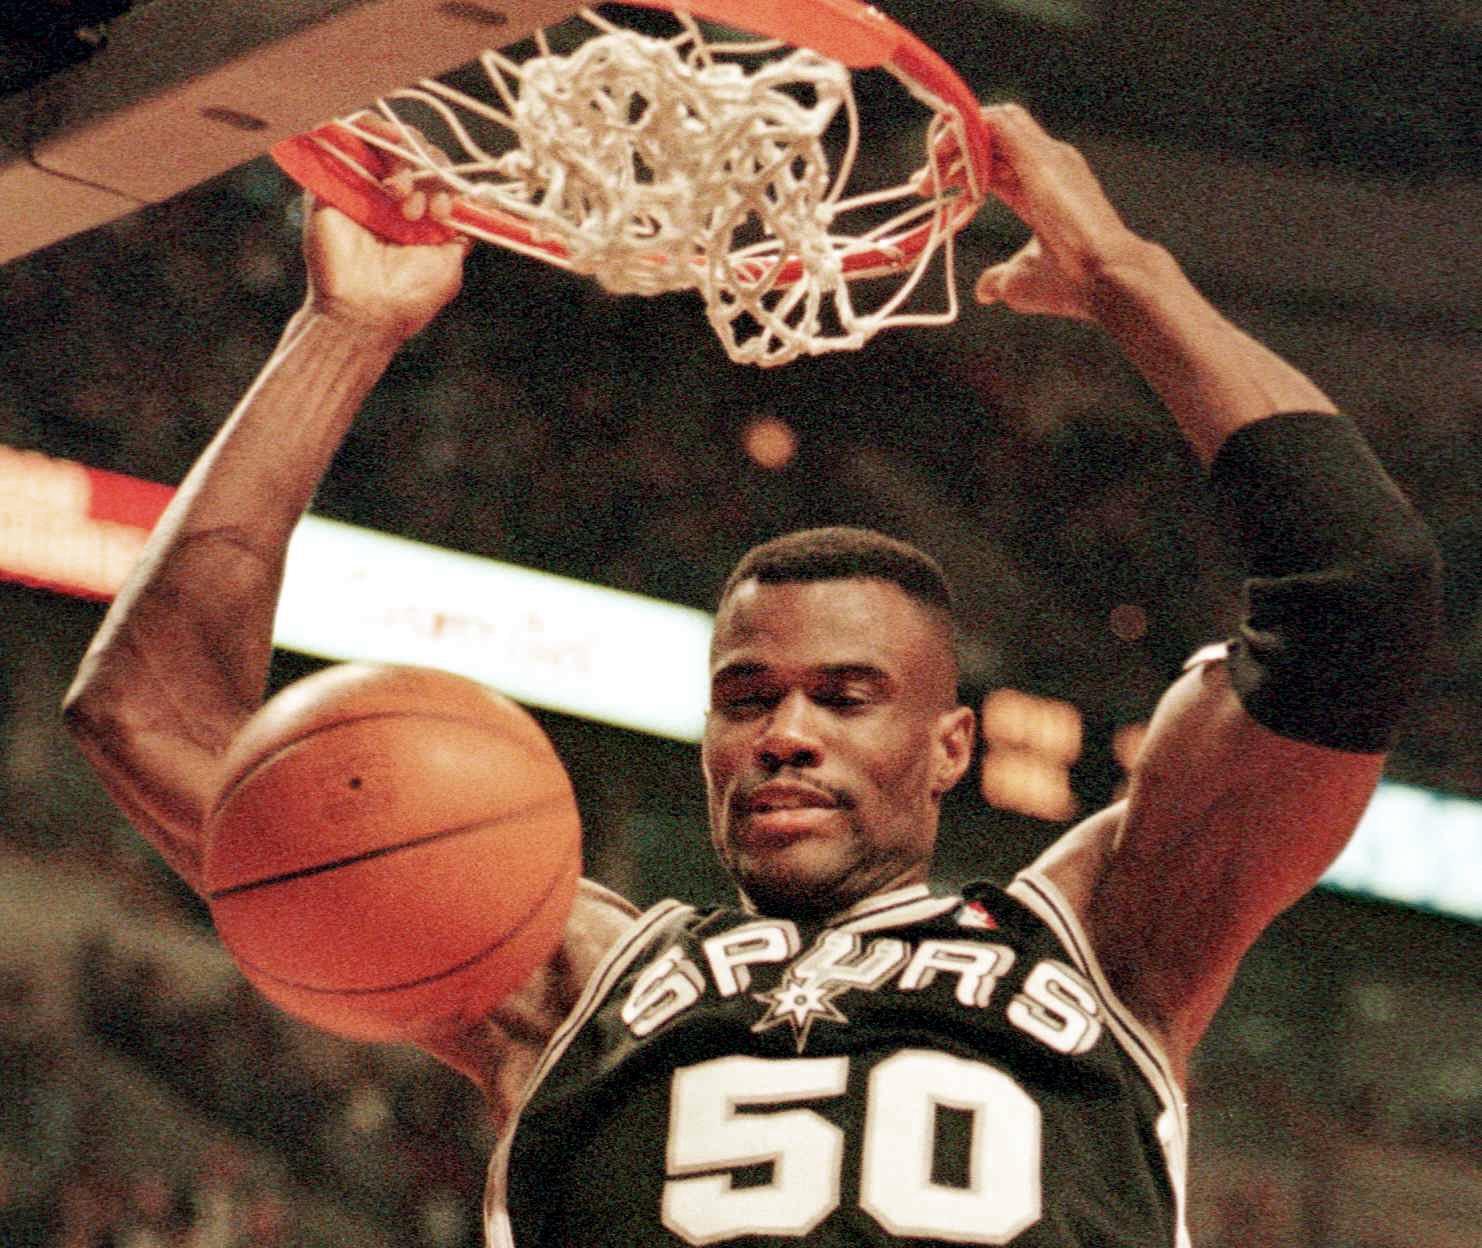 David Robinson: Incredible 50-point performance in 1987 first